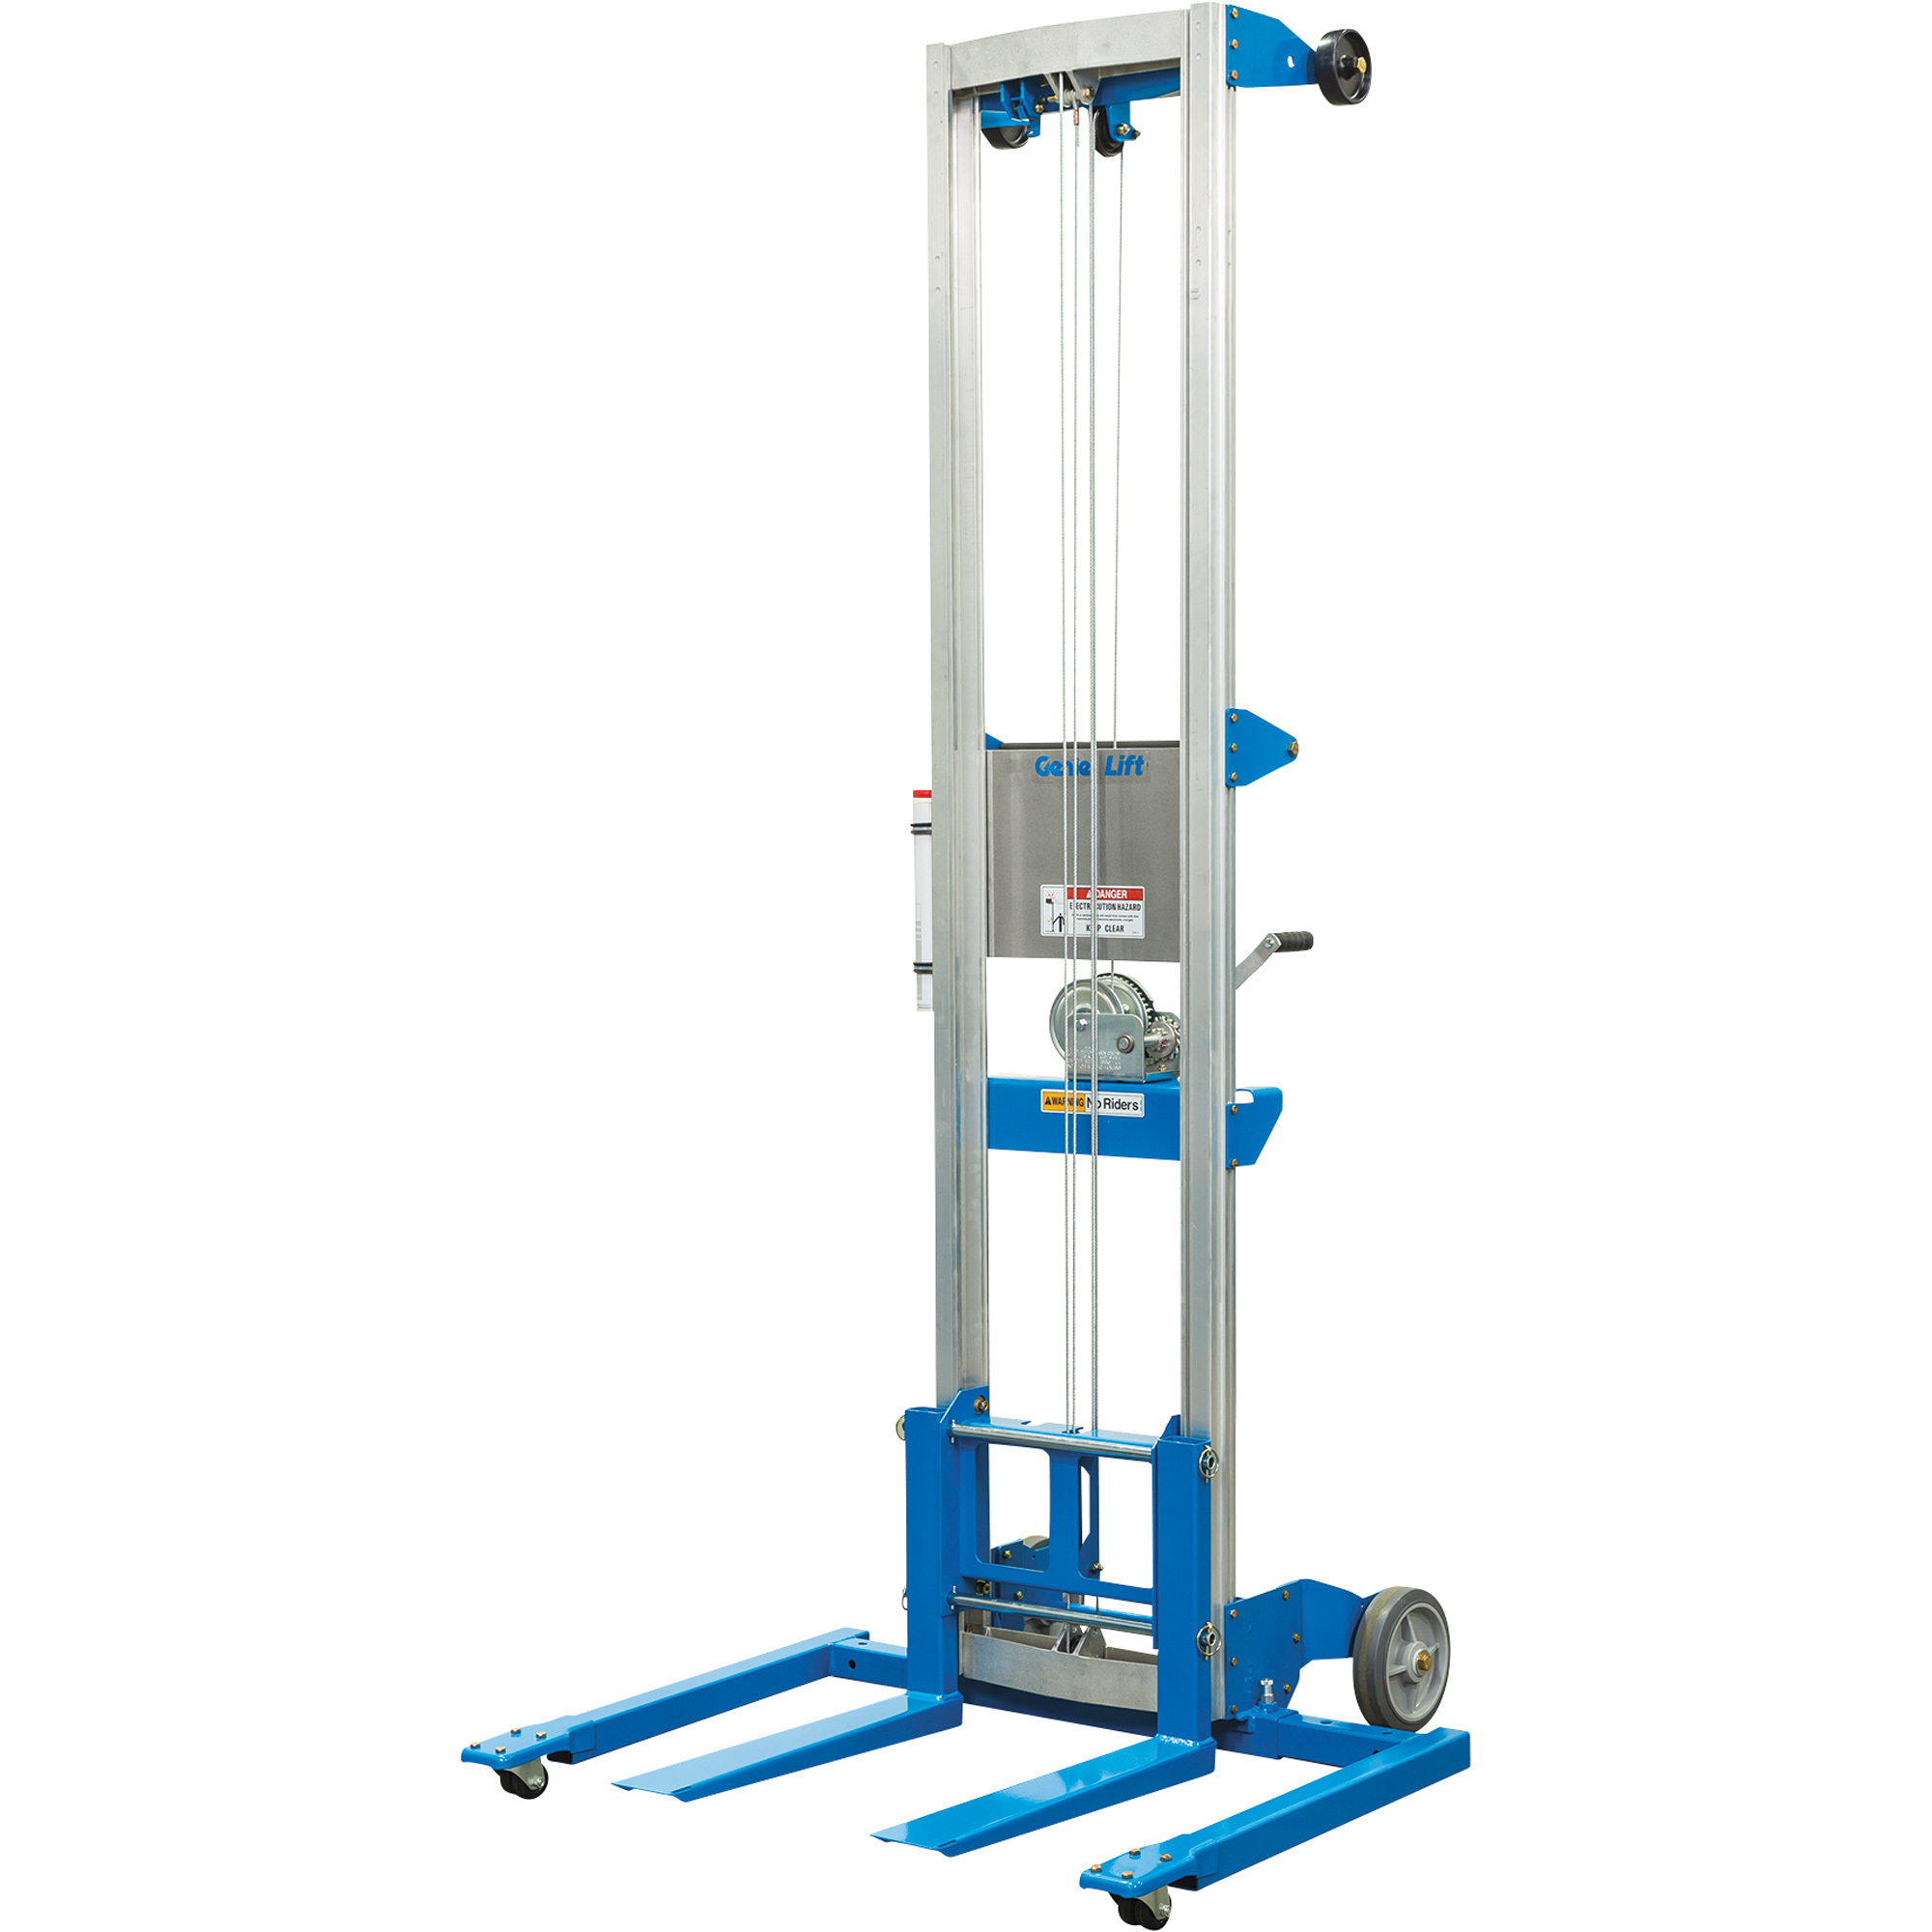 Genie Material Manual Lift with Straddle Base â10ft. Lift, 350-Lb. Capacity, Model GL-10 STRADDLE